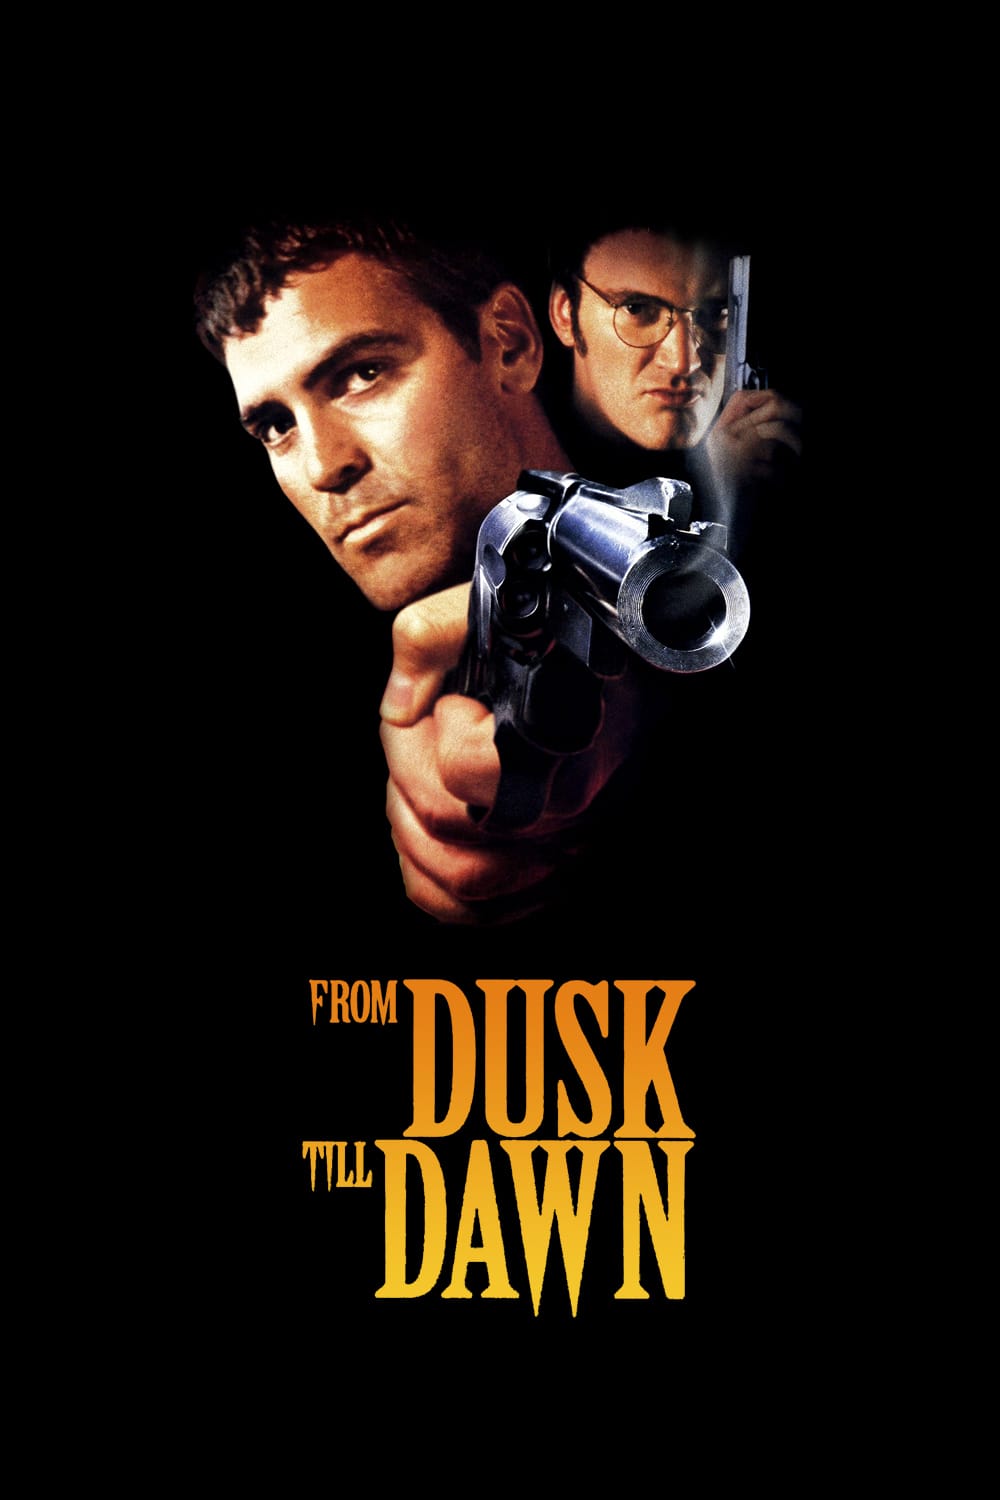 from dawn until dusk download free